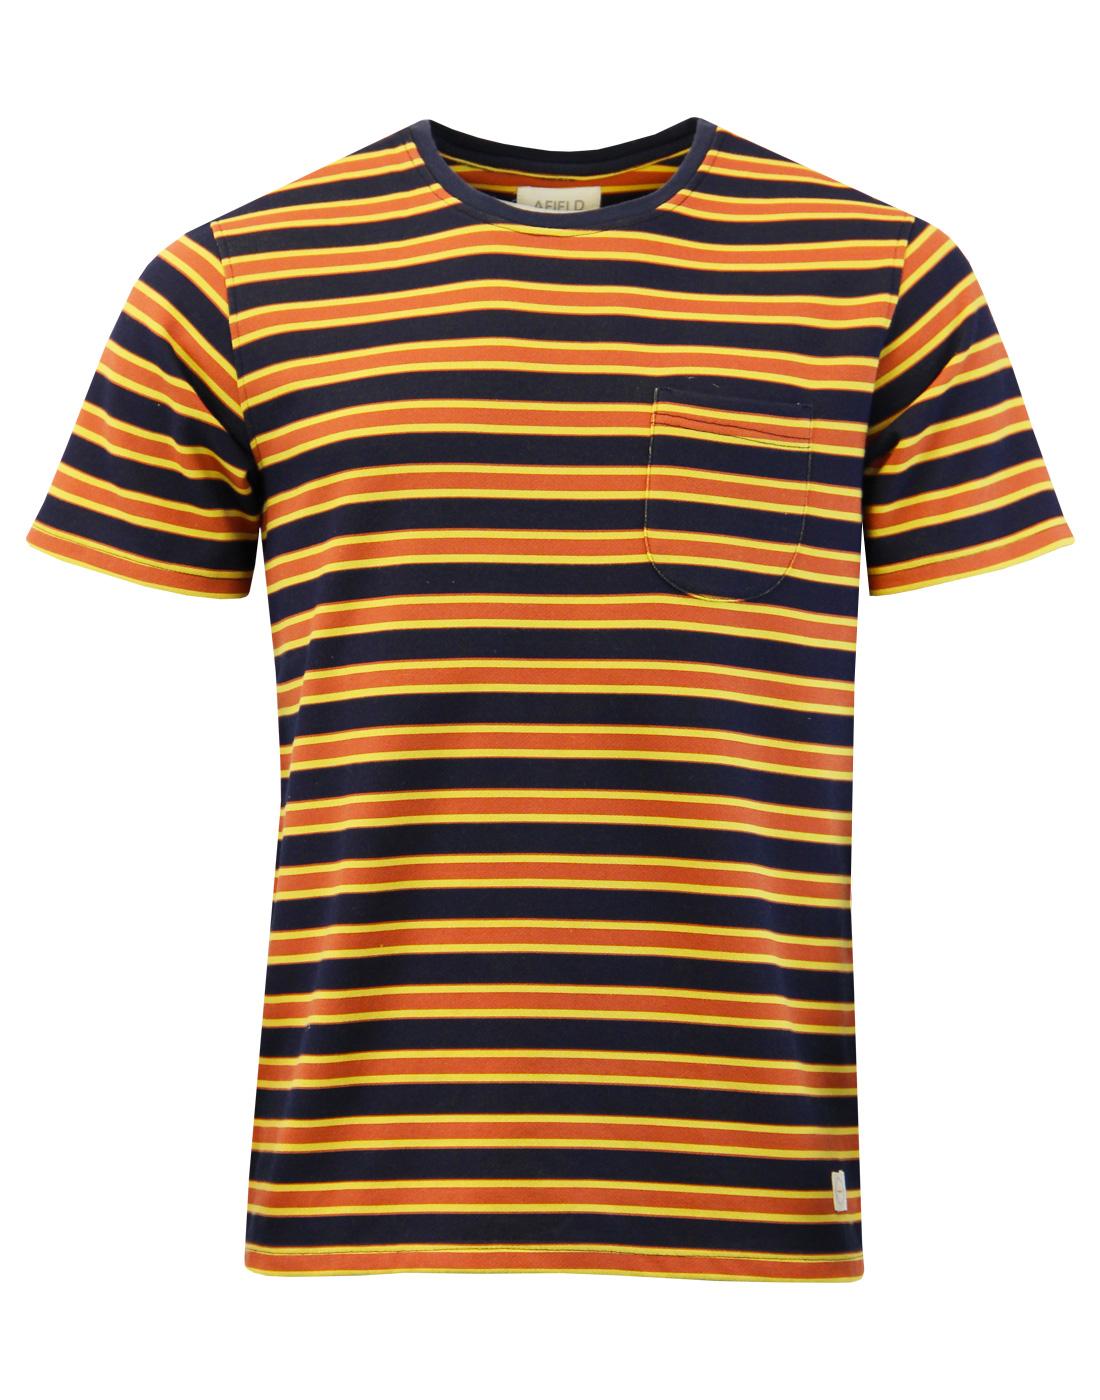 AFIELD Retro Mod French Terry Stripe Pocket T-Shirt in Red/Navy